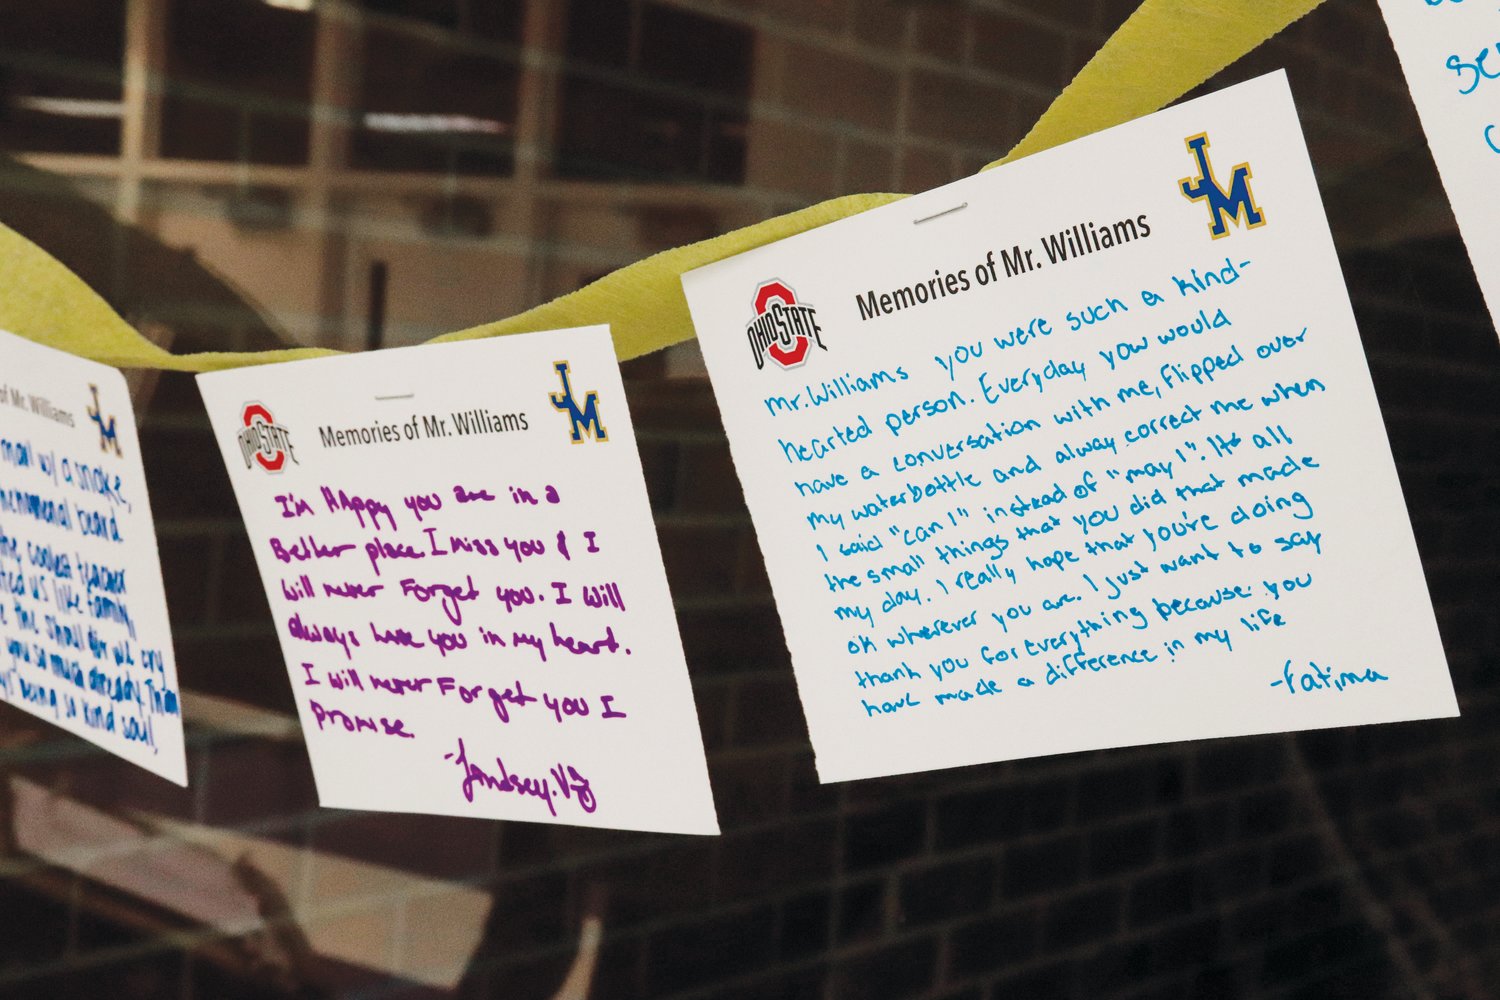 Dozens of students wrote notes lining the school hallway thanking Williams for his impact on their life.